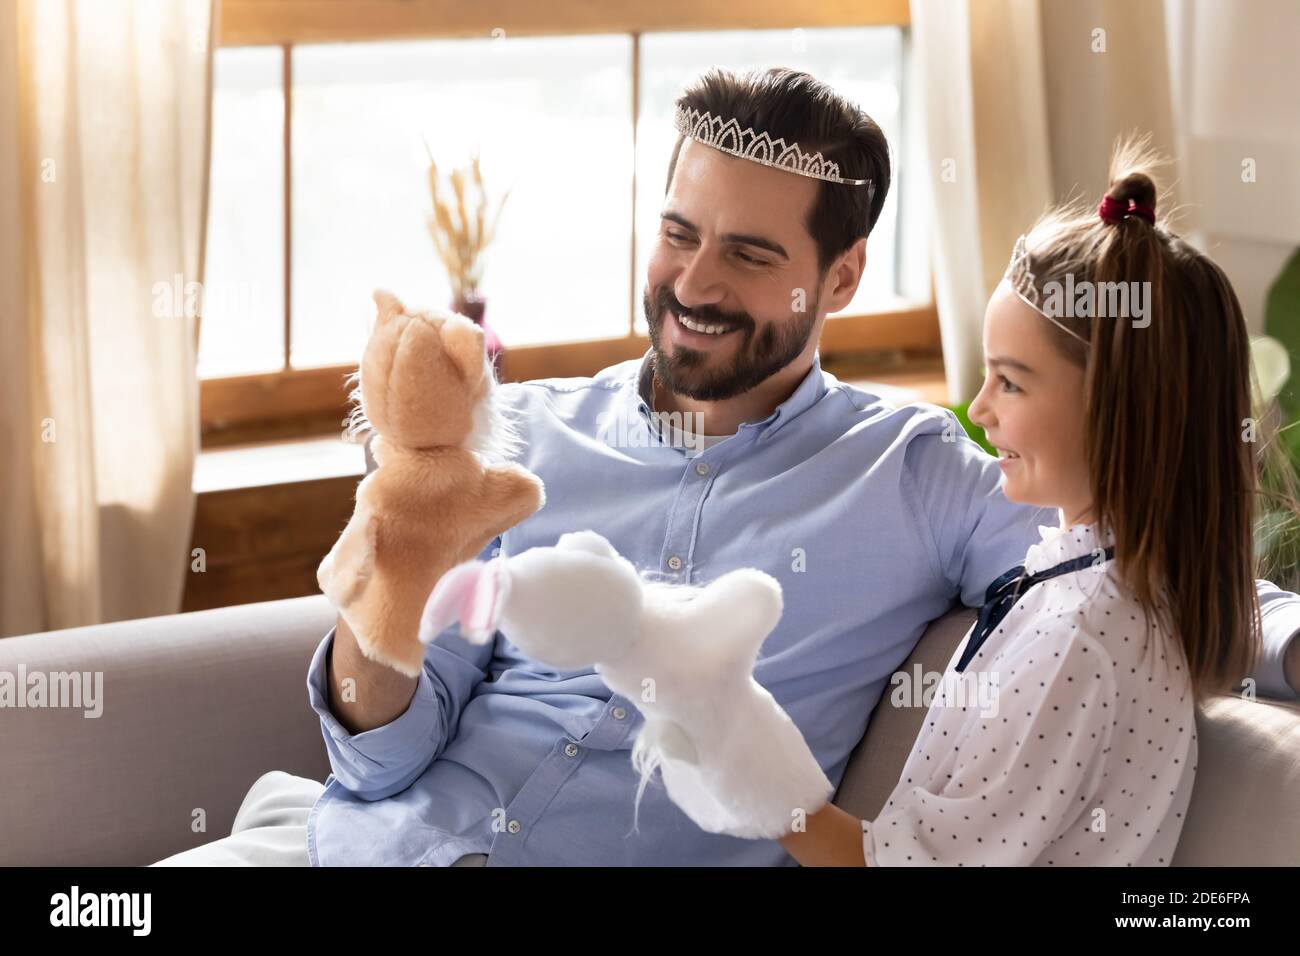 Young Caucasian dad have fun play girly game with daughter Stock Photo